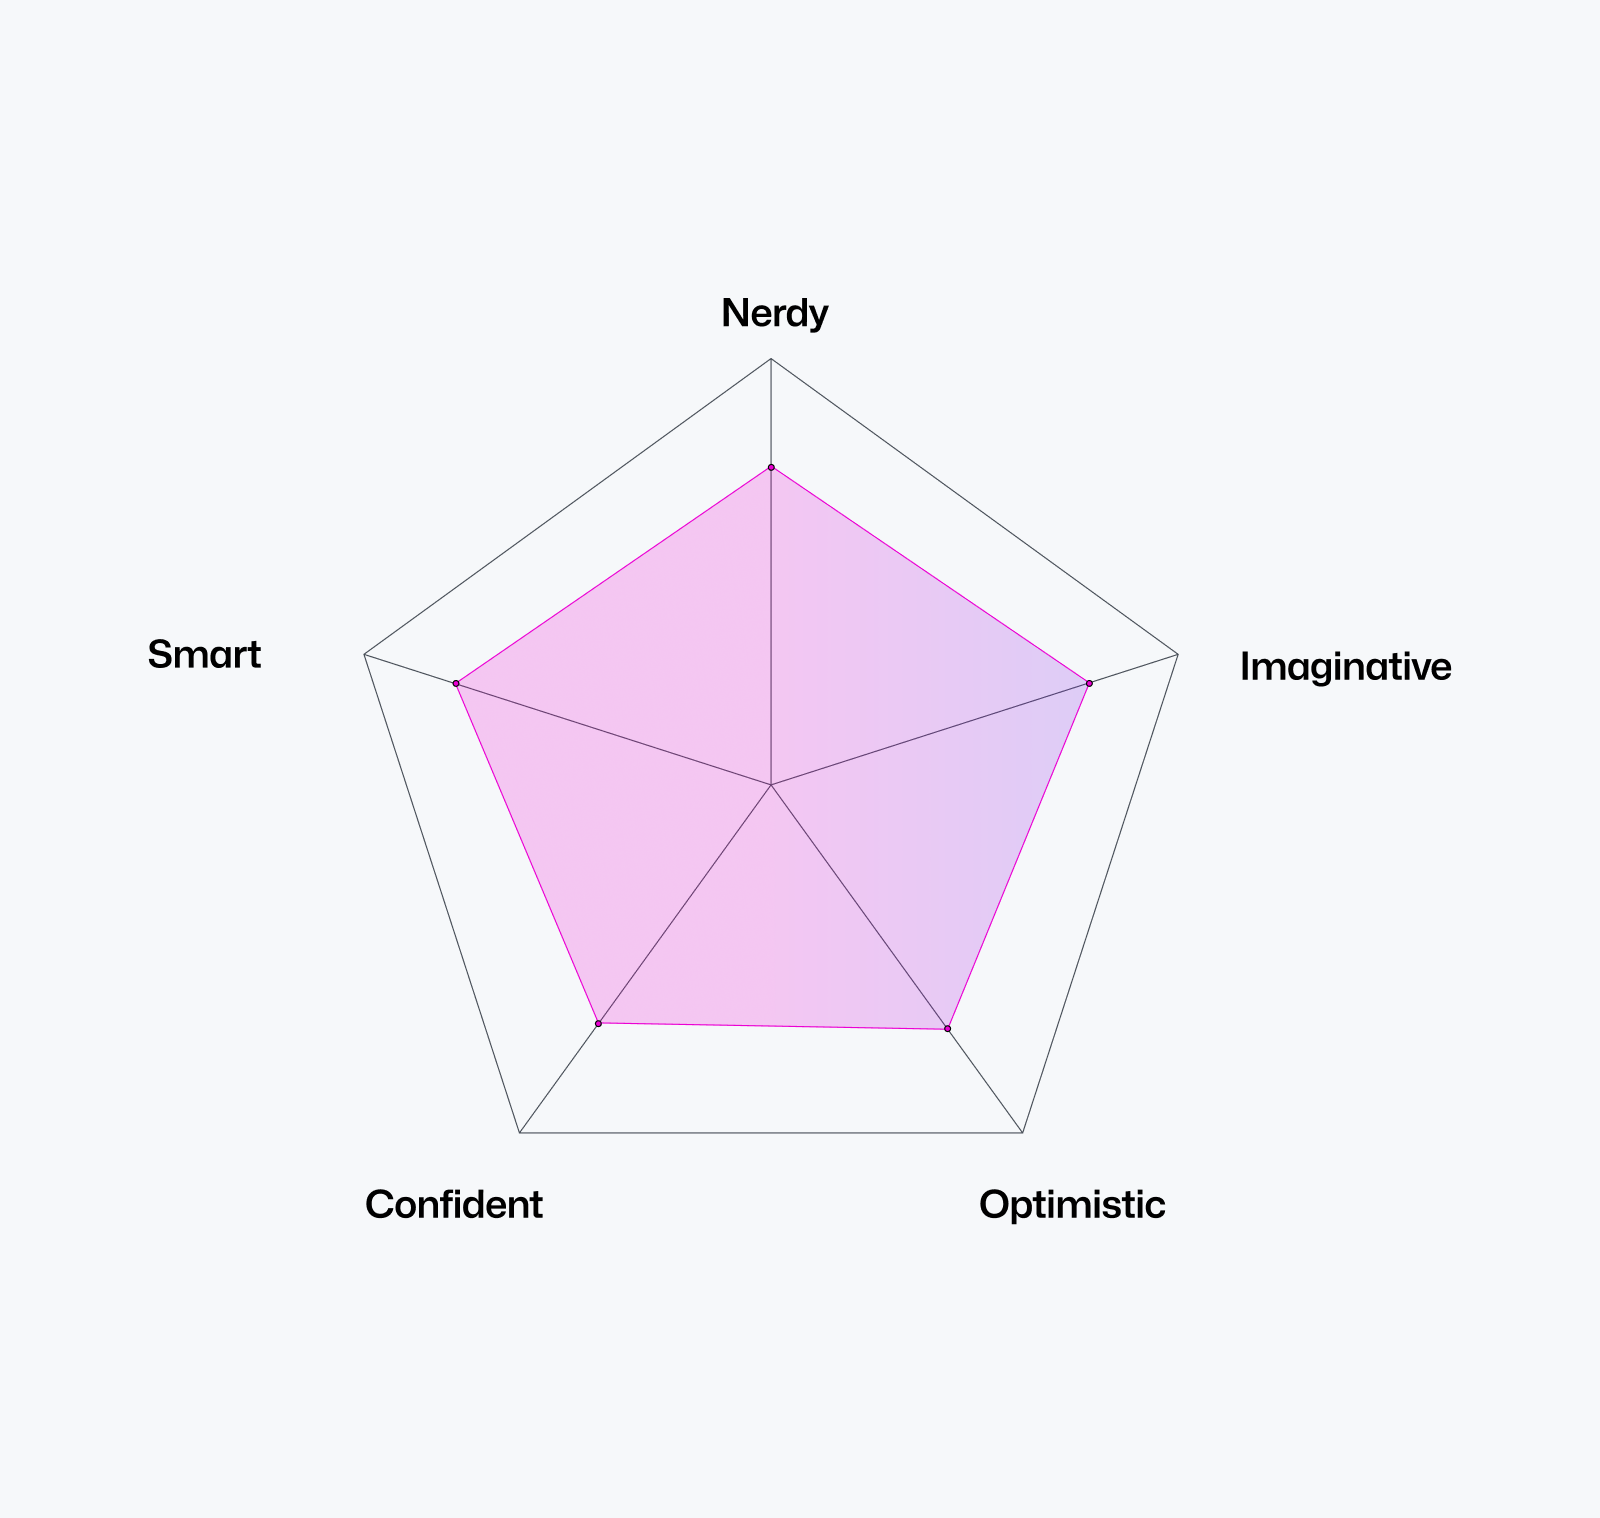 A pentagonal diagram where each point of the shape is associated with one of our five brand attributes.